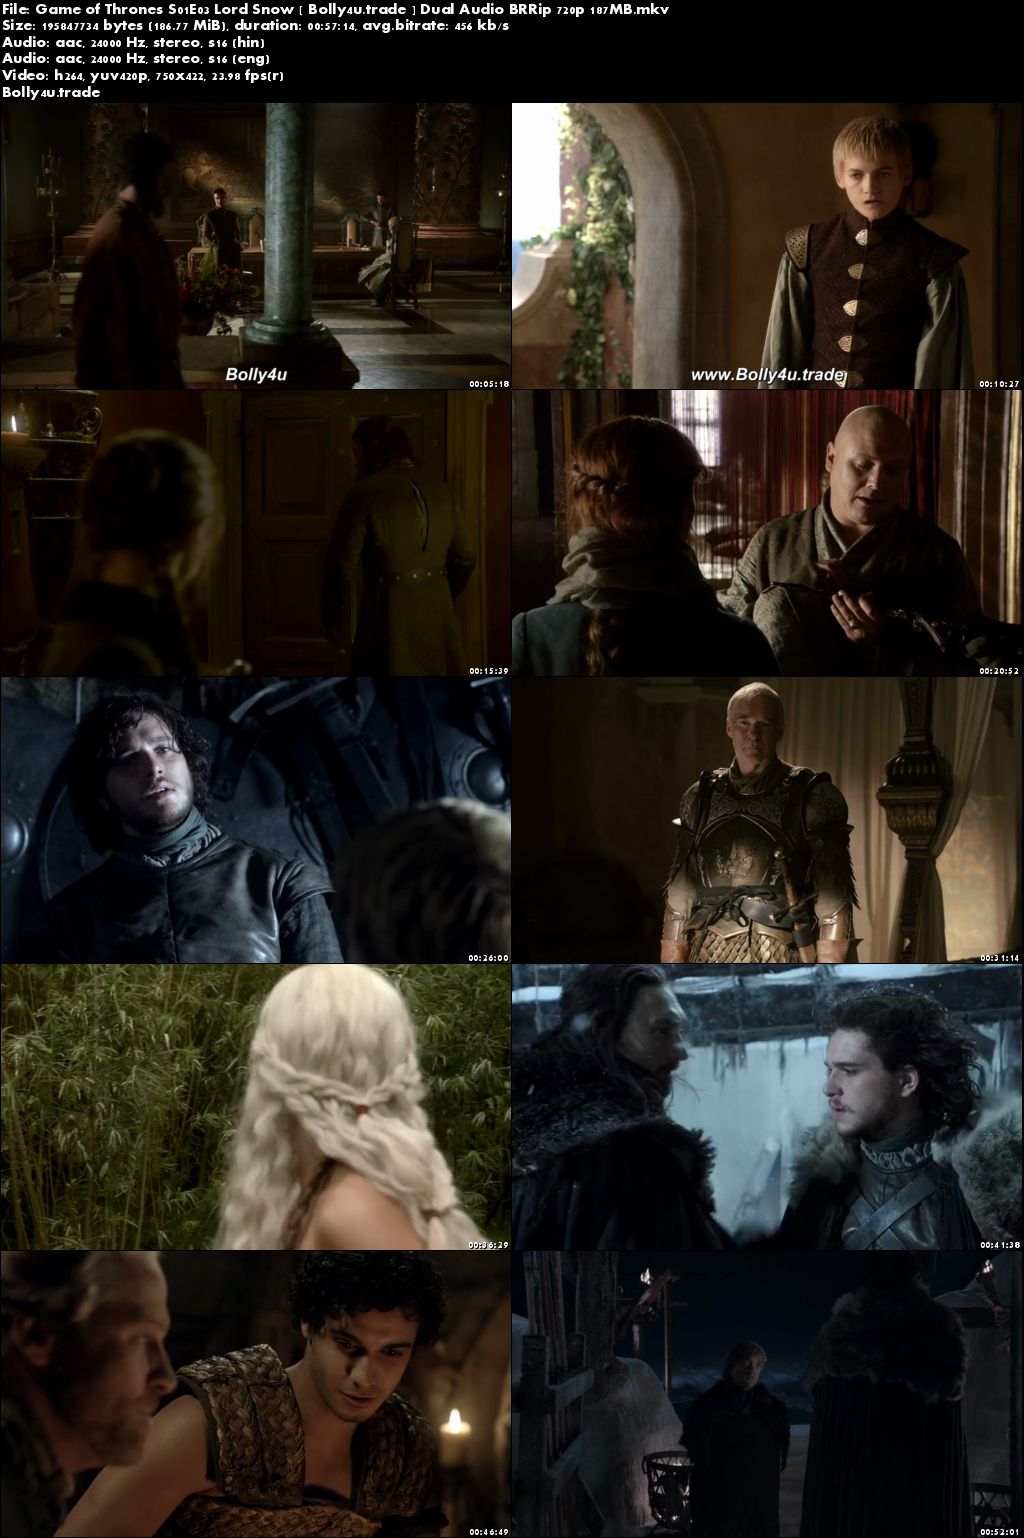 Game of Thrones S01E03 Lord Snow BRRip 180MB Hindi Dual Audio 480p Dpwm;pad